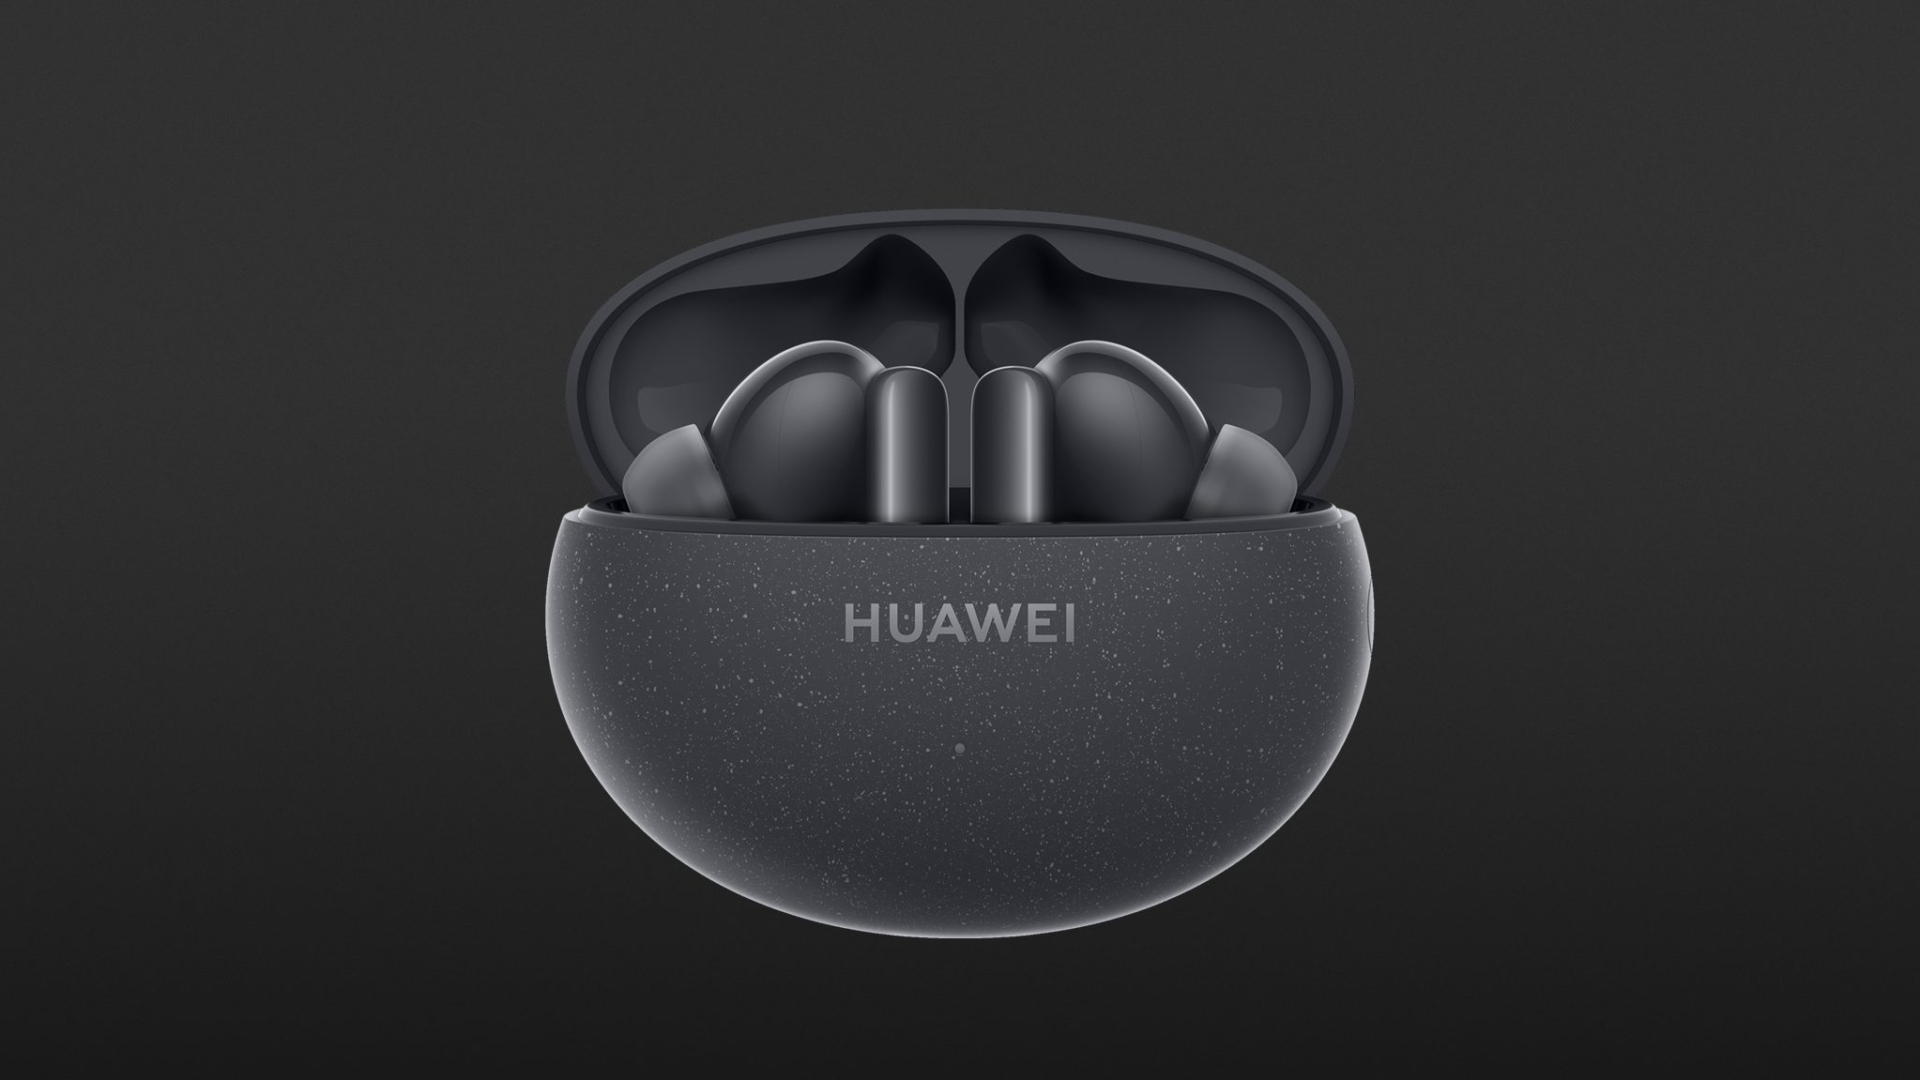 Huawei FreeBuds 5i review - Affordable in-ear headphones with LDAC